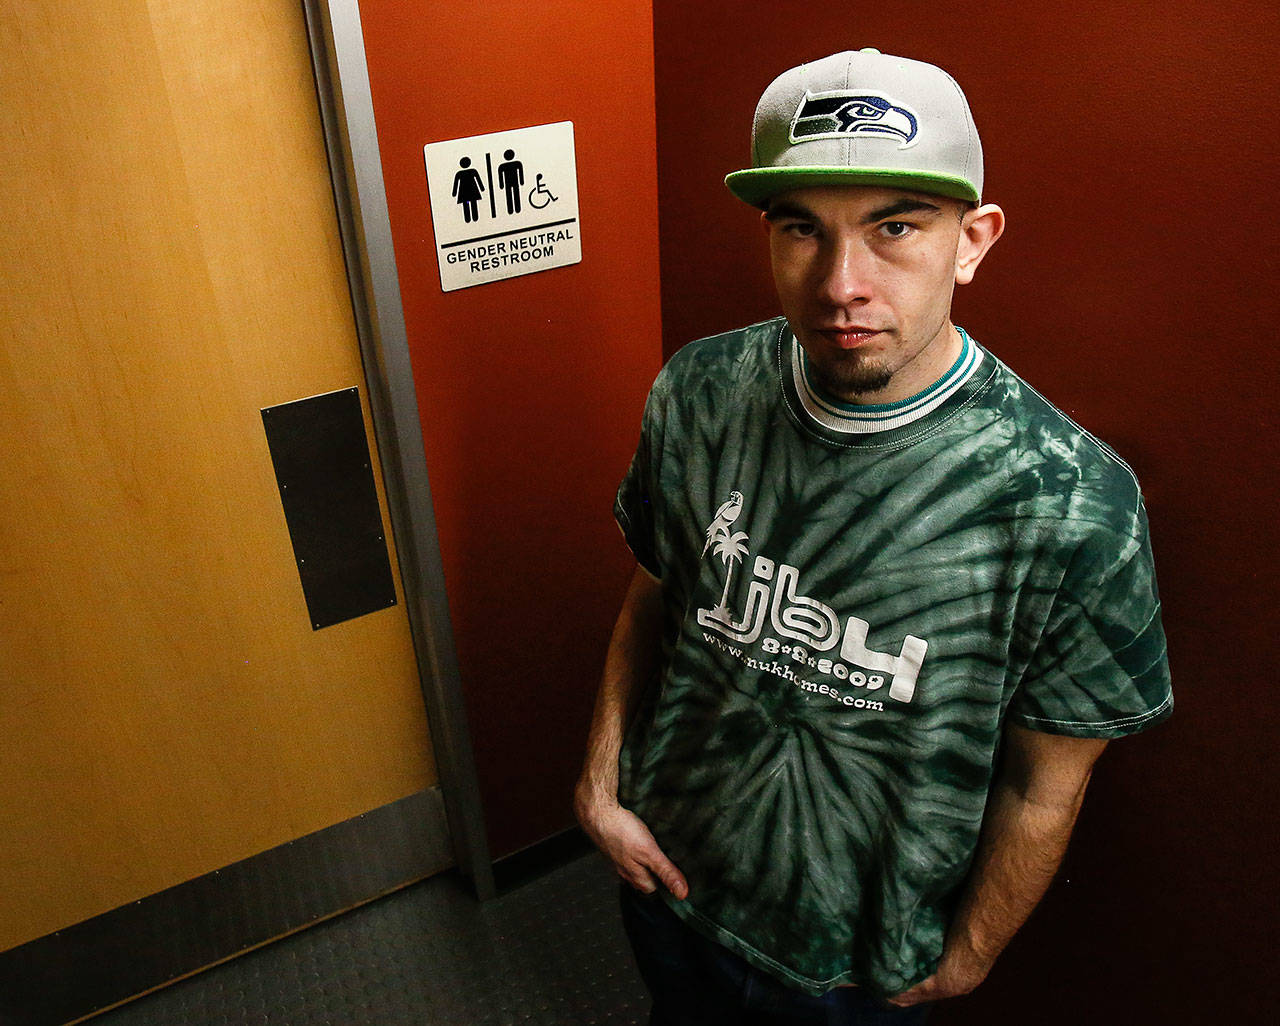 Colton Smith, 22, was among those who used one of two new gender-neutral restrooms in Snohomish County’s Robert J. Drewel Administration Building on Monday. (Dan Bates / The Herald)